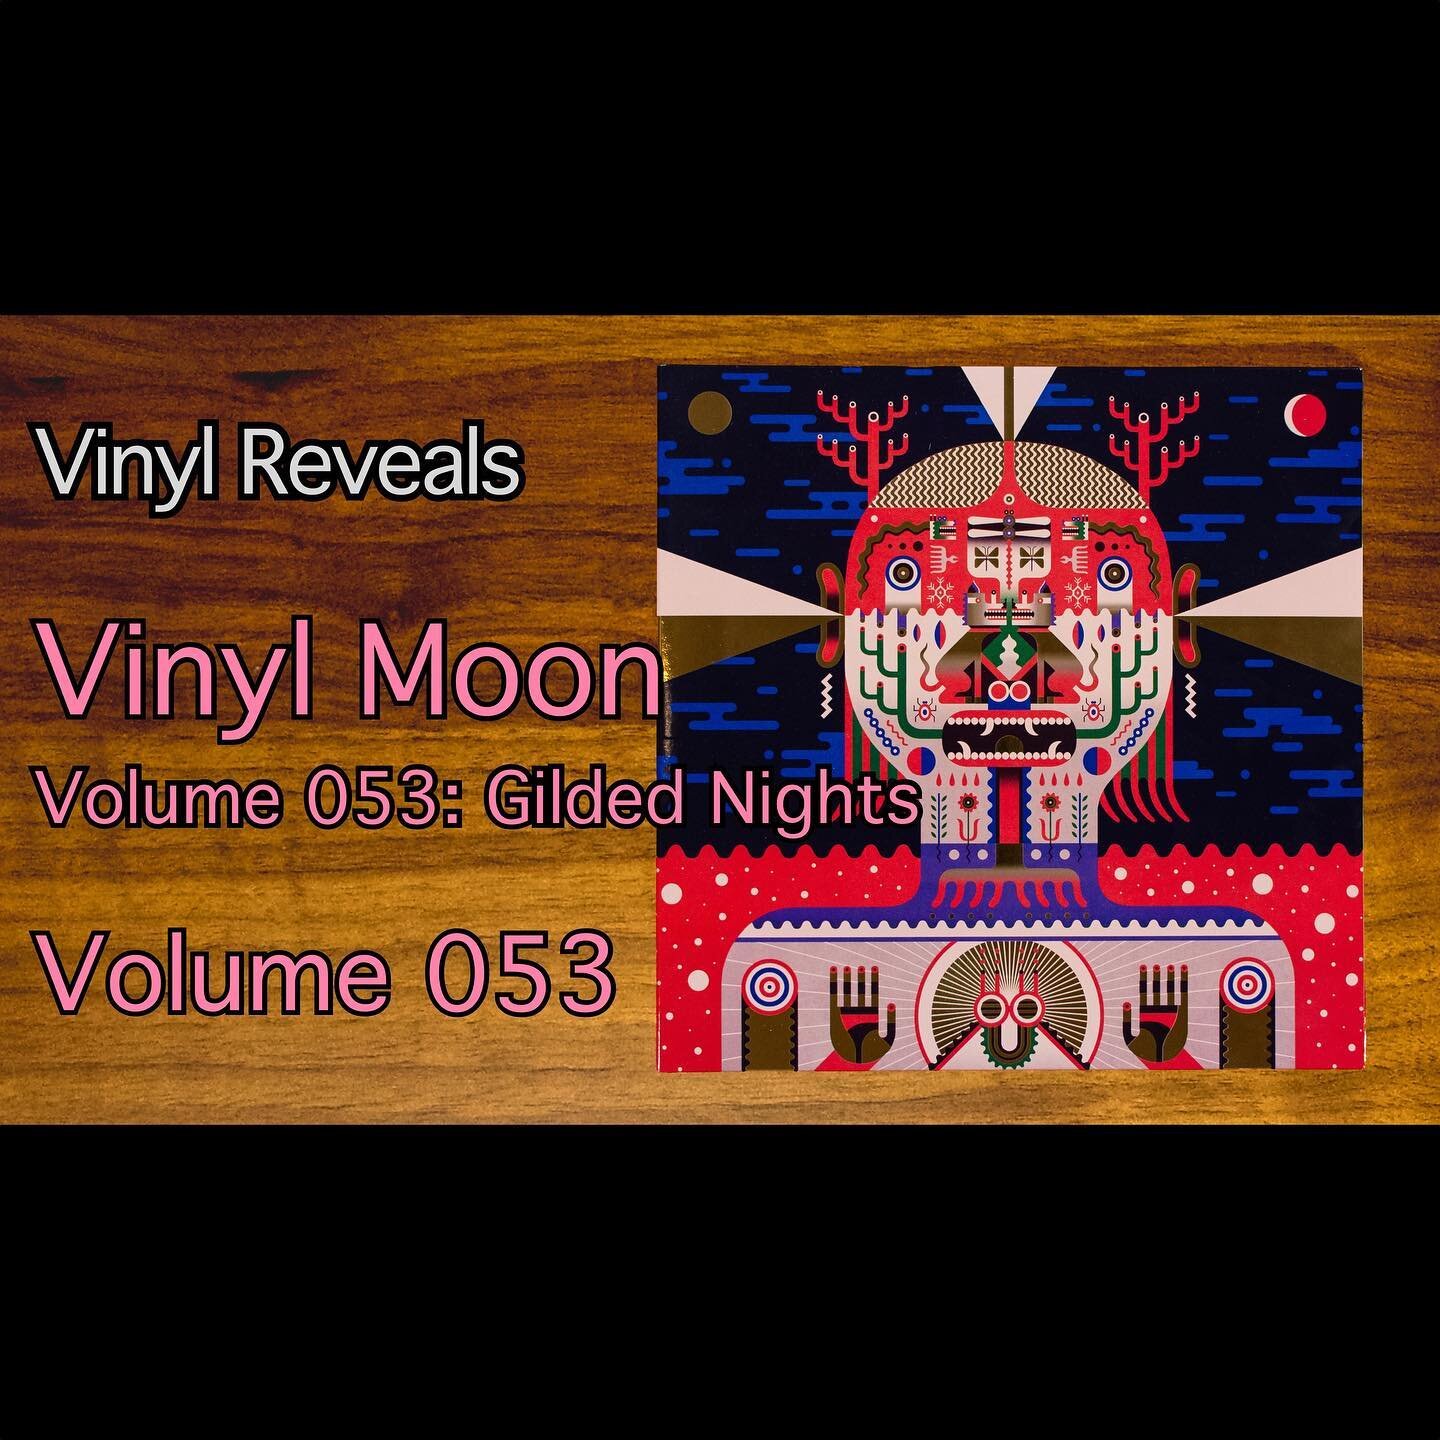 Today we are looking at Vinyl Moon Volume 053: Gilded Nights. Video is now live on the Vinyl Reveals YouTube channel. Link in profile.

#vinylReveal #vinyl #vinylcollection #vinylrecords #records #vinylReveals #vinylcommunity @vinylmoonco